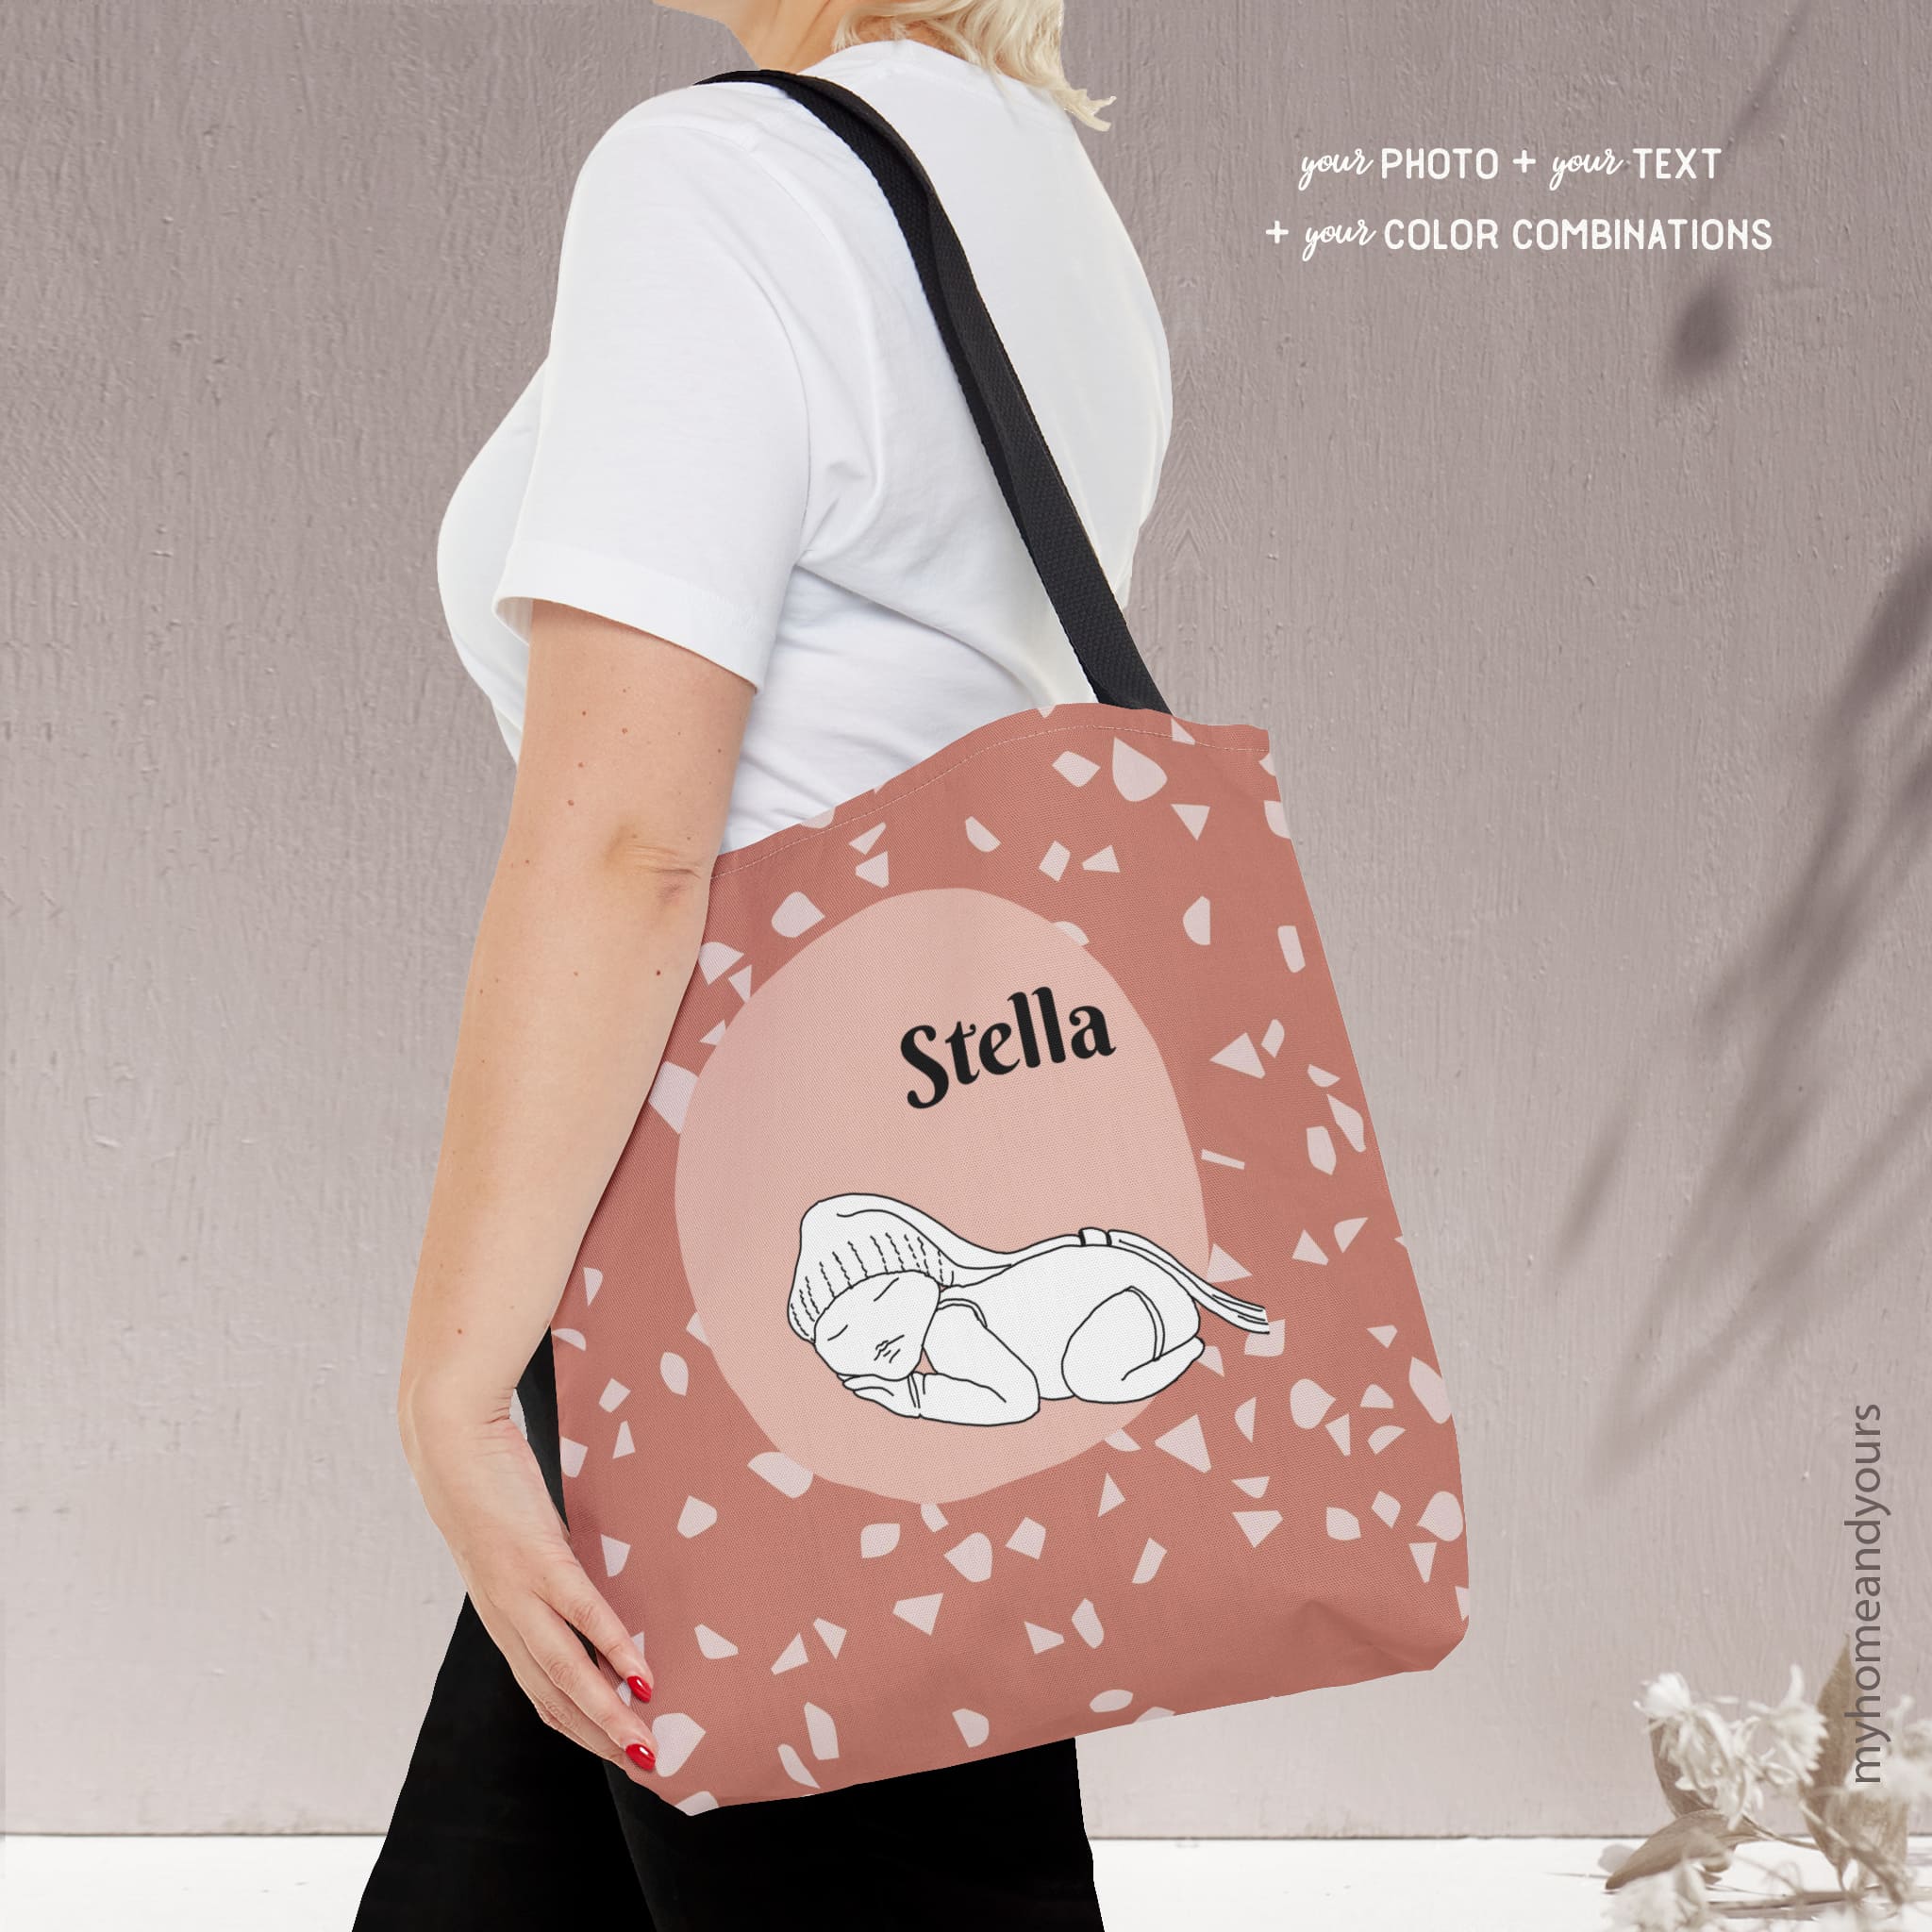 New mom custom baby bag personalized with line art portrait illustration from photo of the new baby on colorful back ground and terrazzo pattern